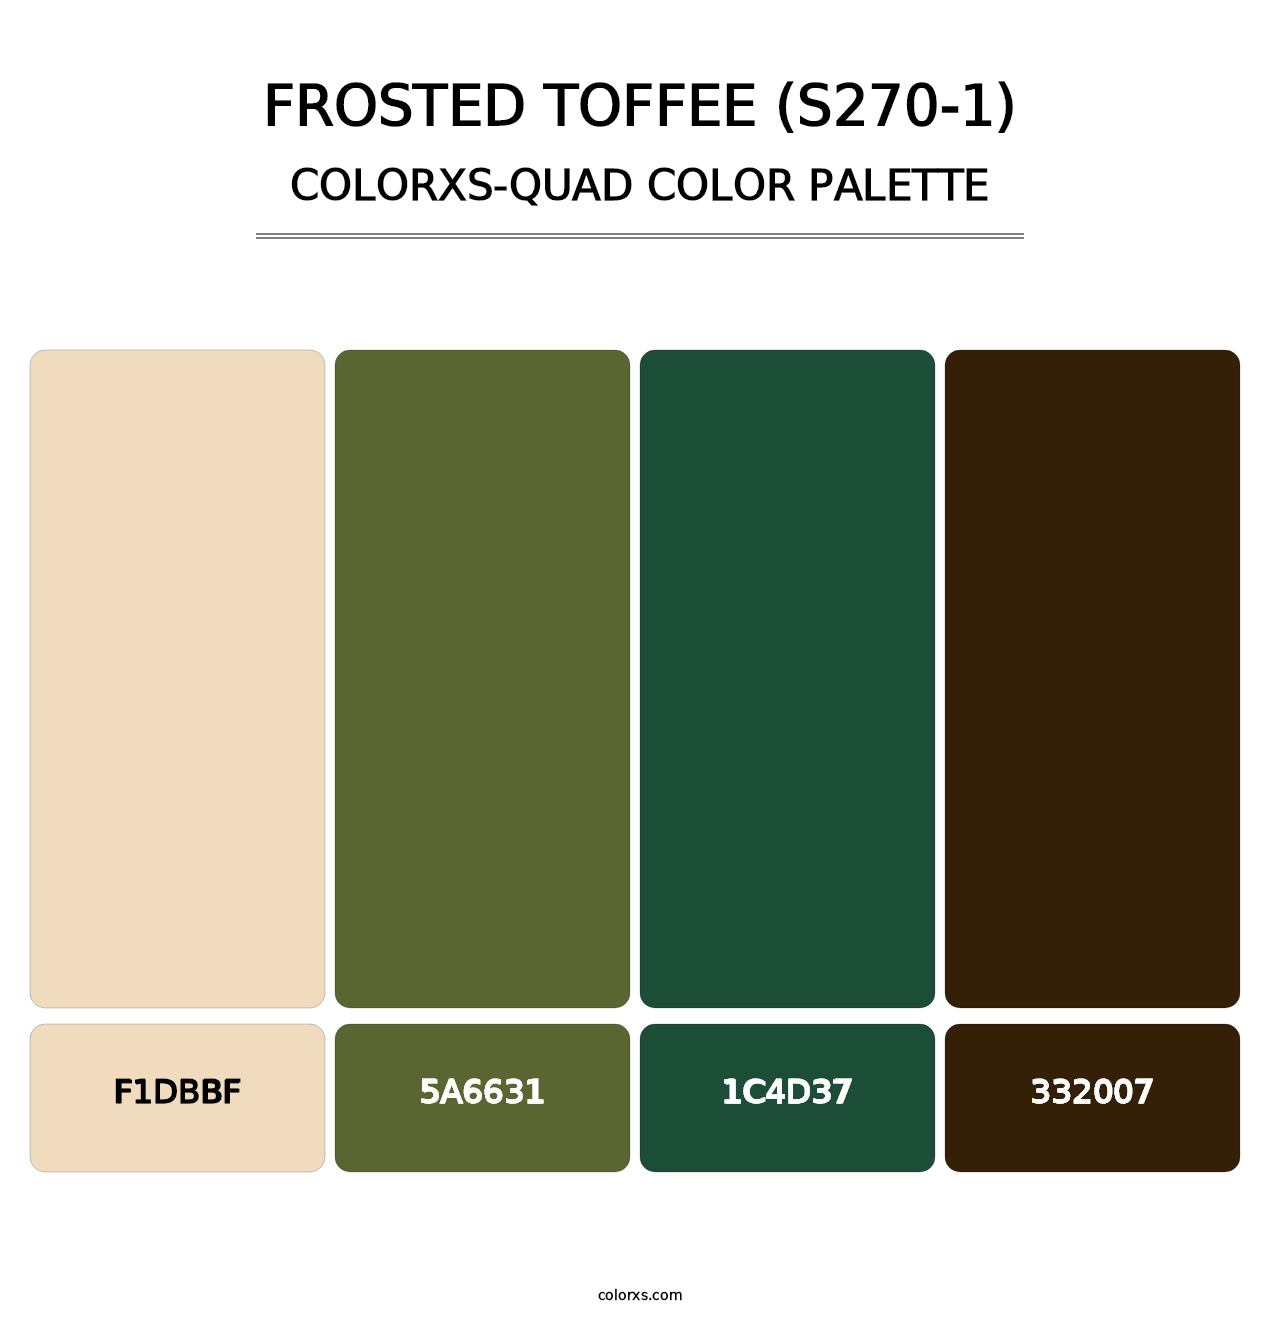 Frosted Toffee (S270-1) - Colorxs Quad Palette